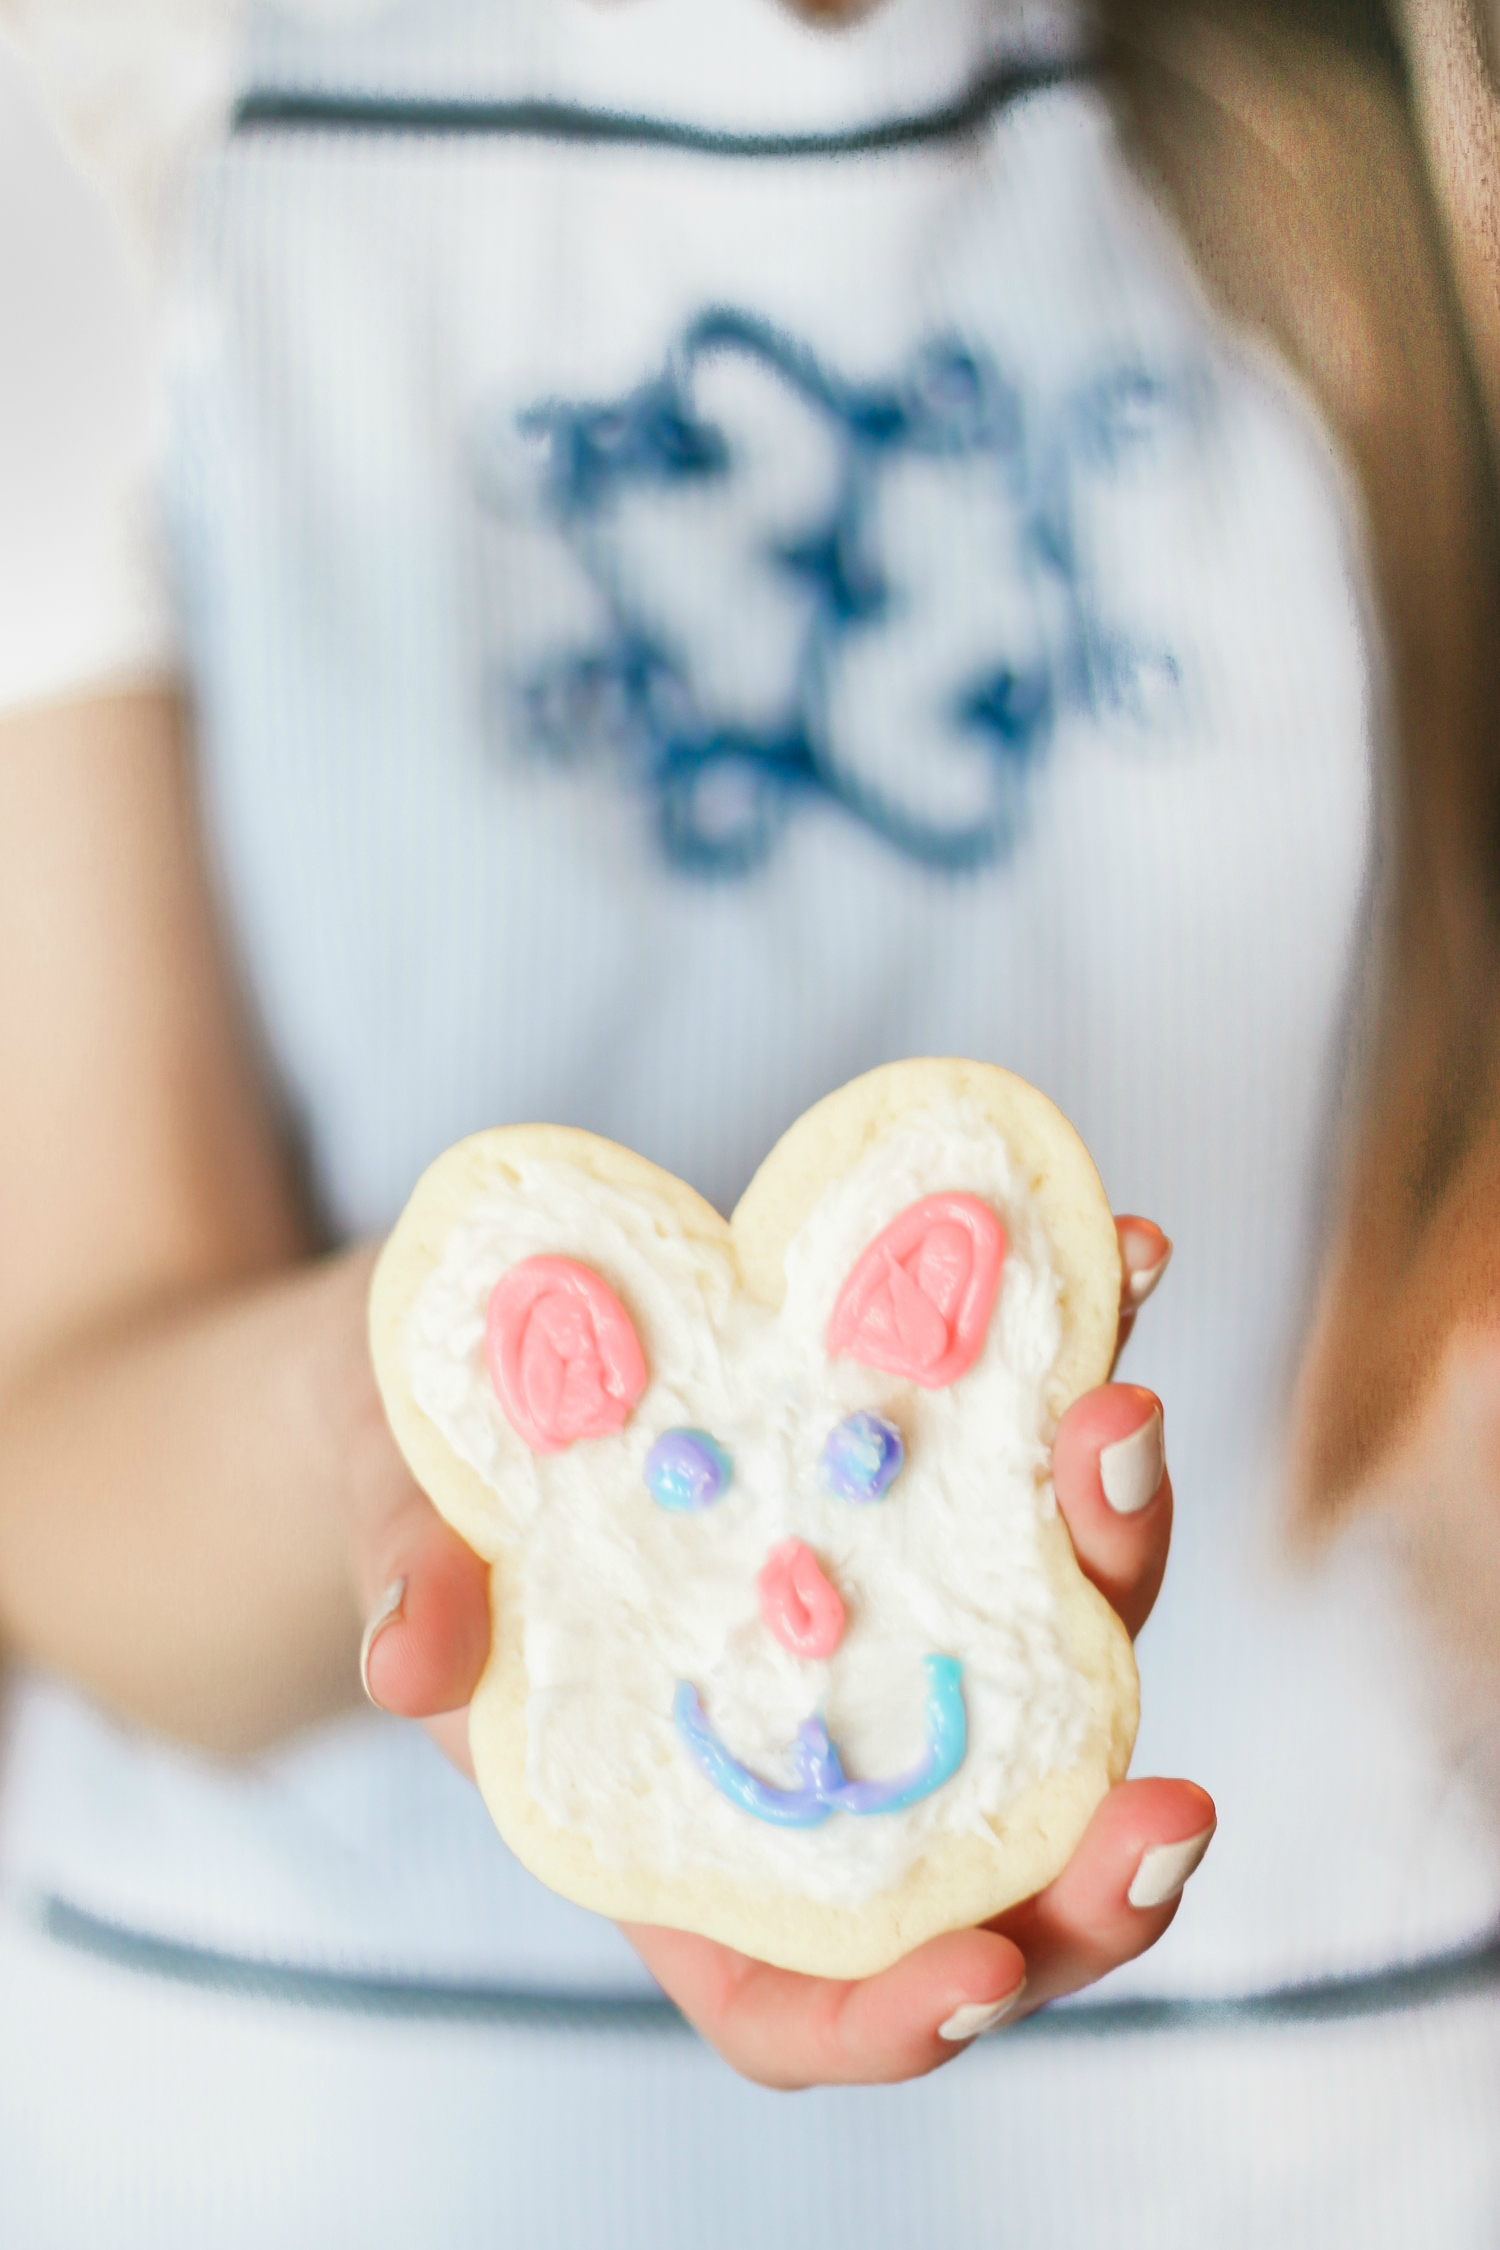 Spring Cravings: How to Survive Your Sweet Tooth with Heartburn by southern lifestyle blogger Stephanie Ziajka from Diary of a Debutante, best way to get rid of heartburn, Omeprazole ODT, Omeprazole orally disintegrating tablet review, Easter cookie baking